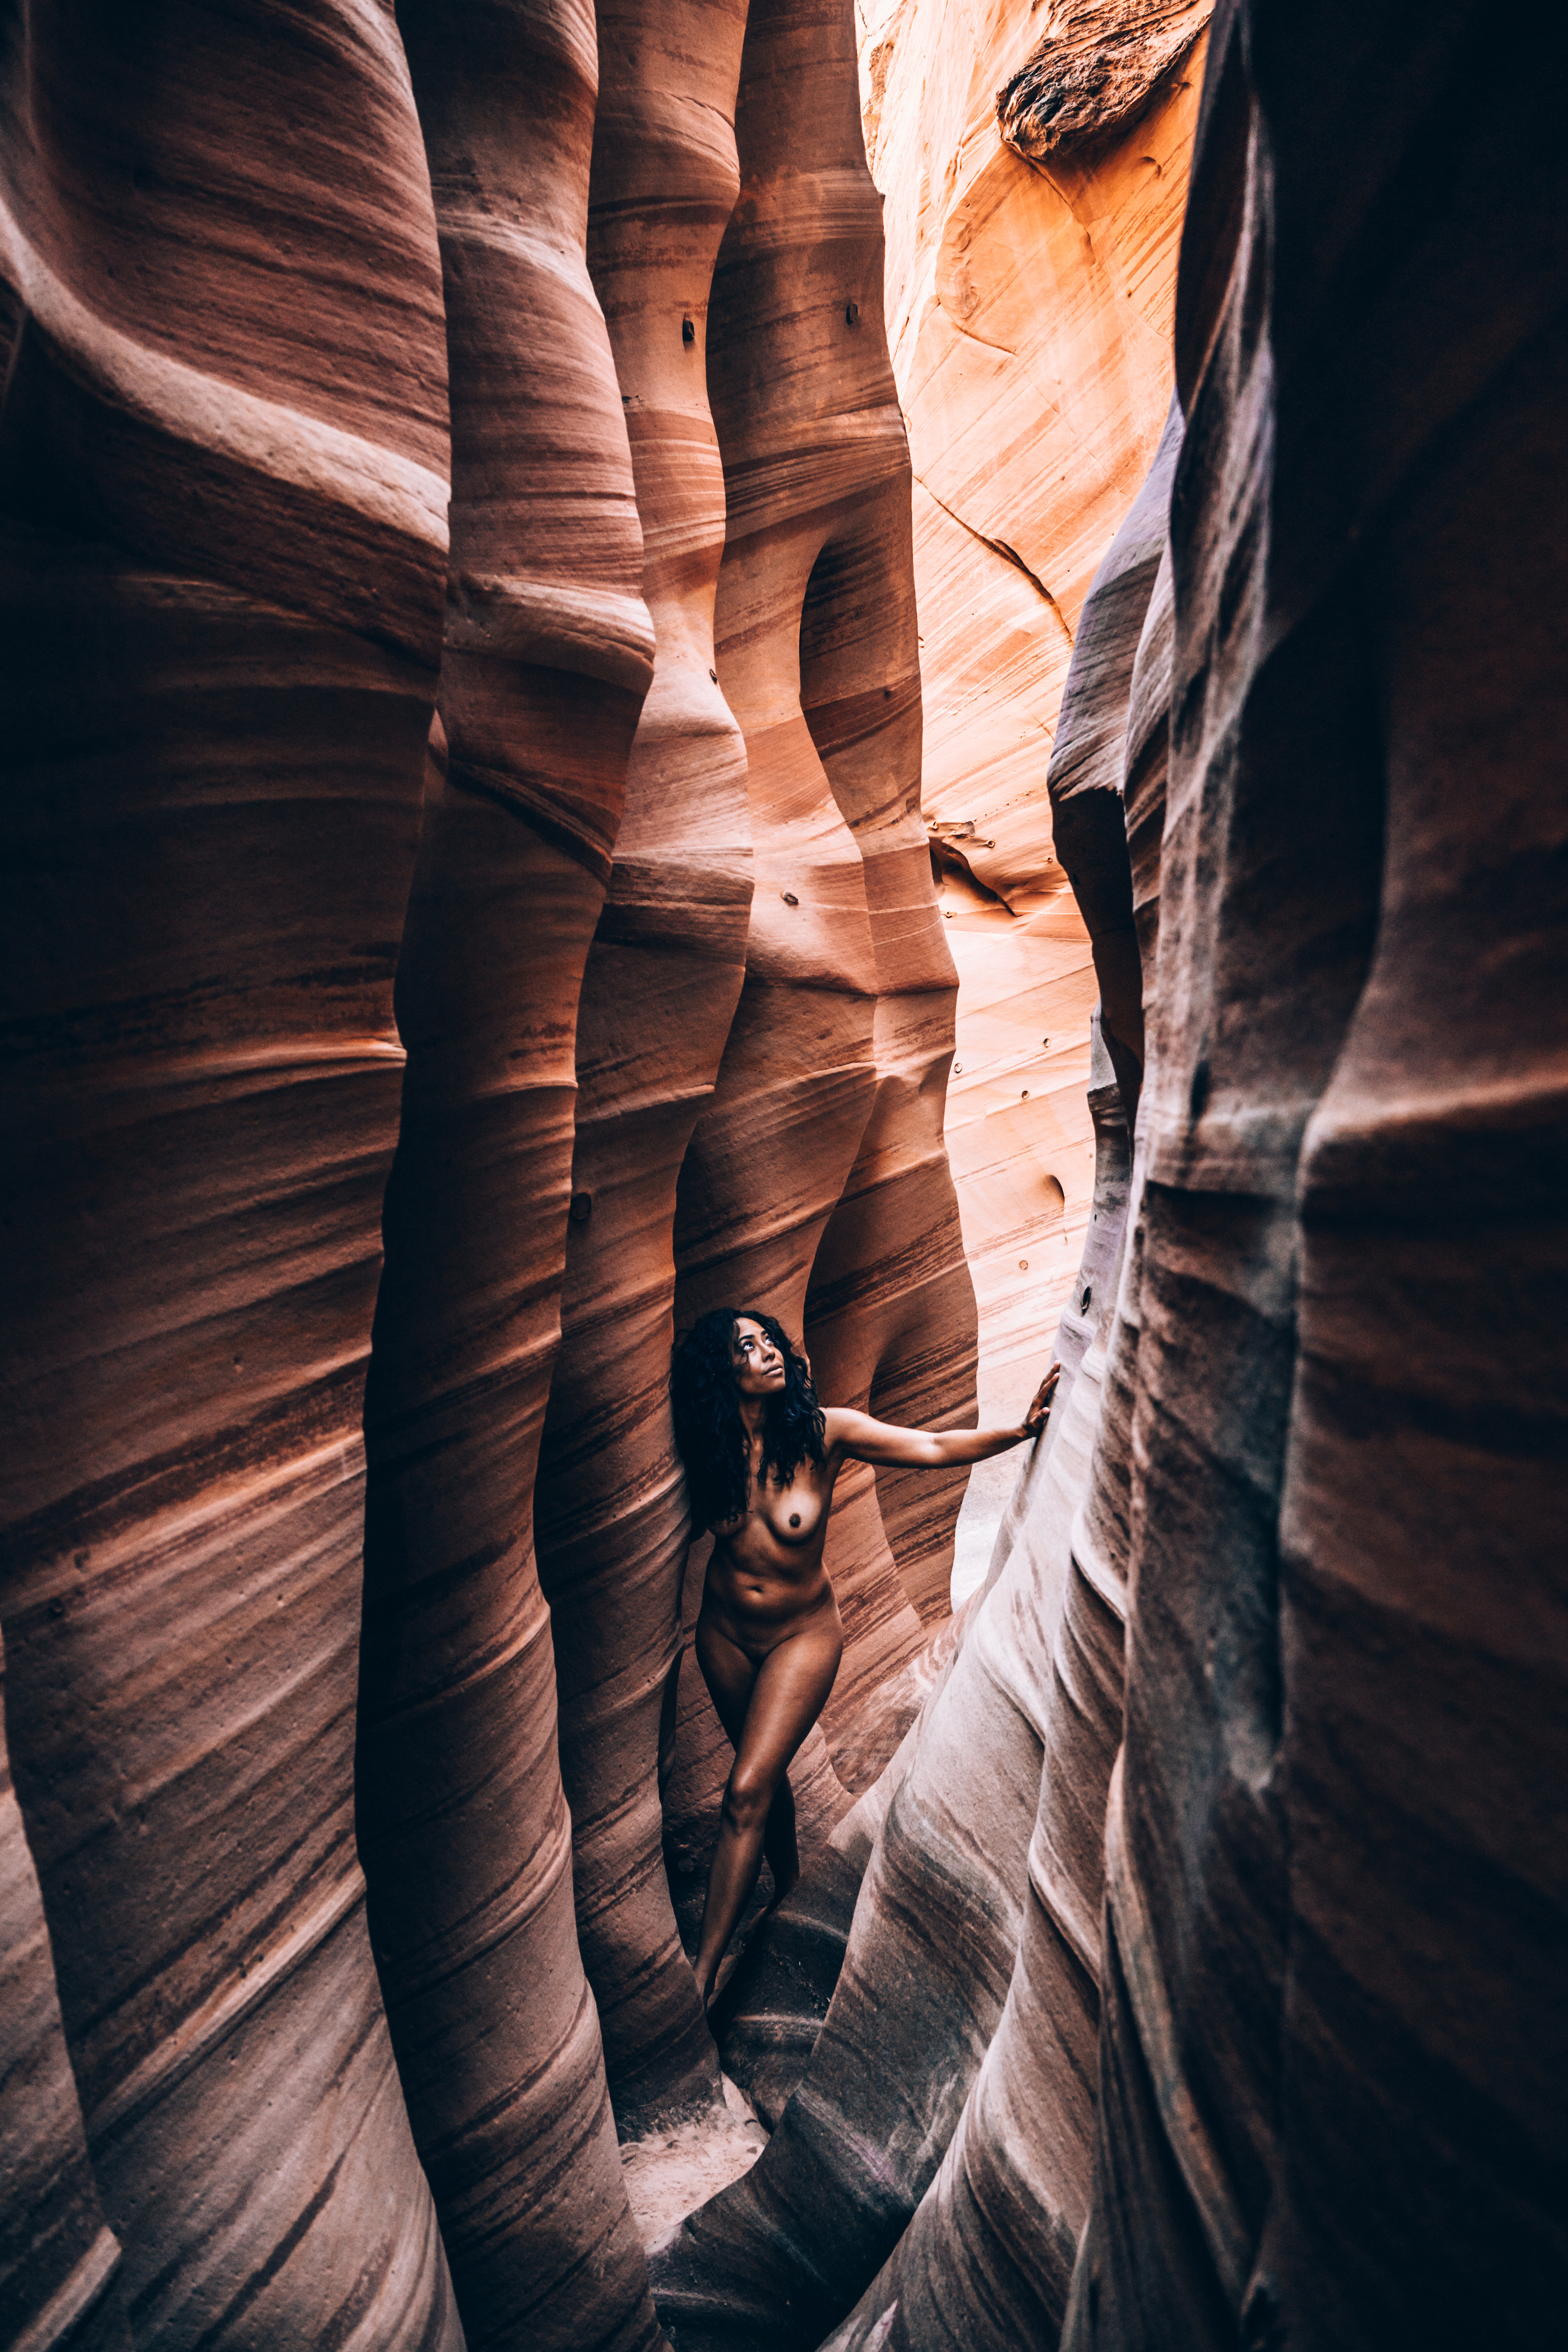 Impermanence III – A Desert Nude Series in the Canyons of the Escalante